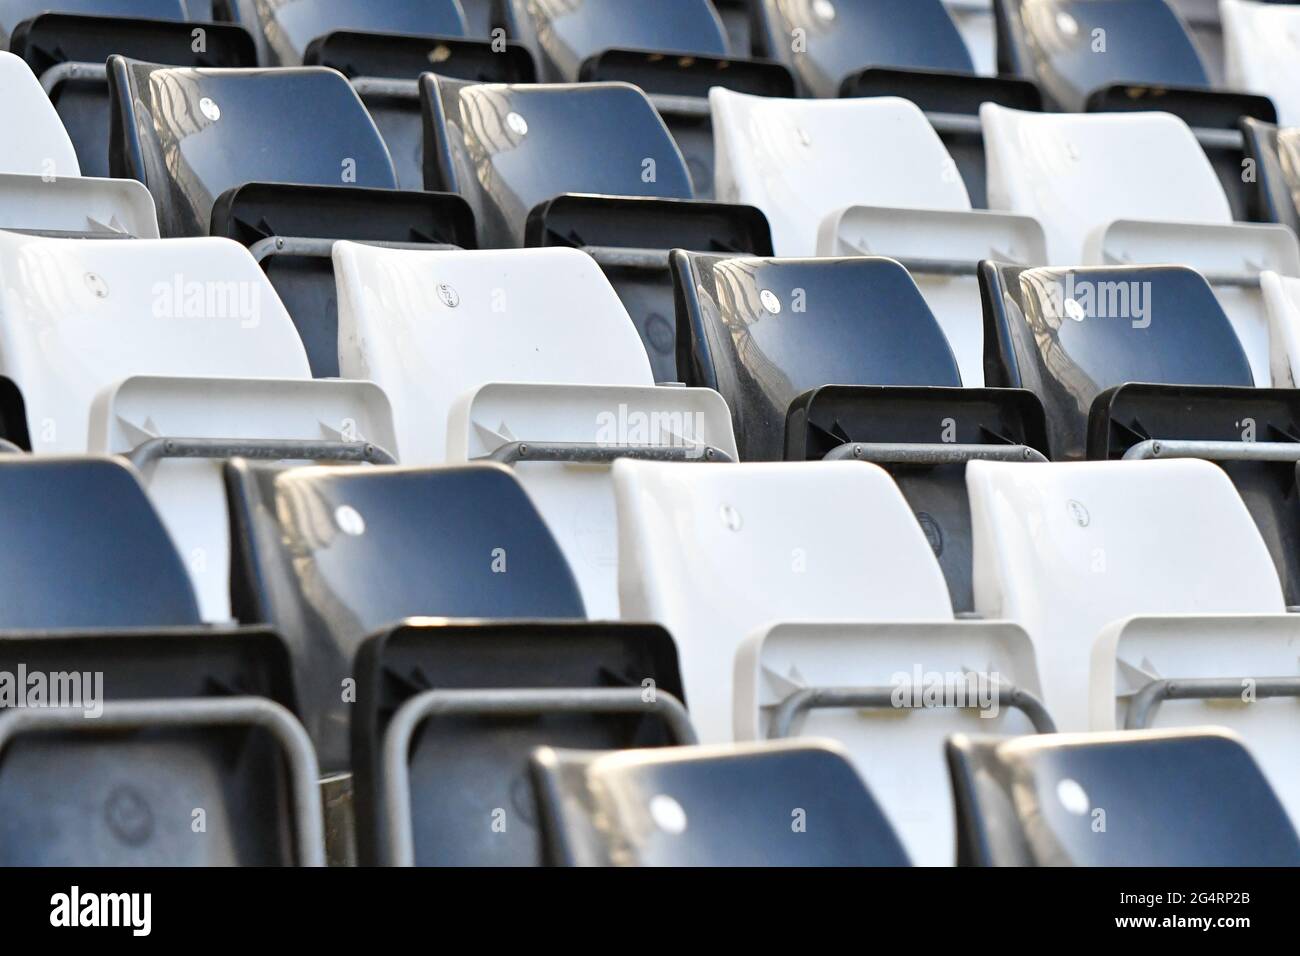 Rows of black and white seats at the Swansea.com stadium. Stock Photo